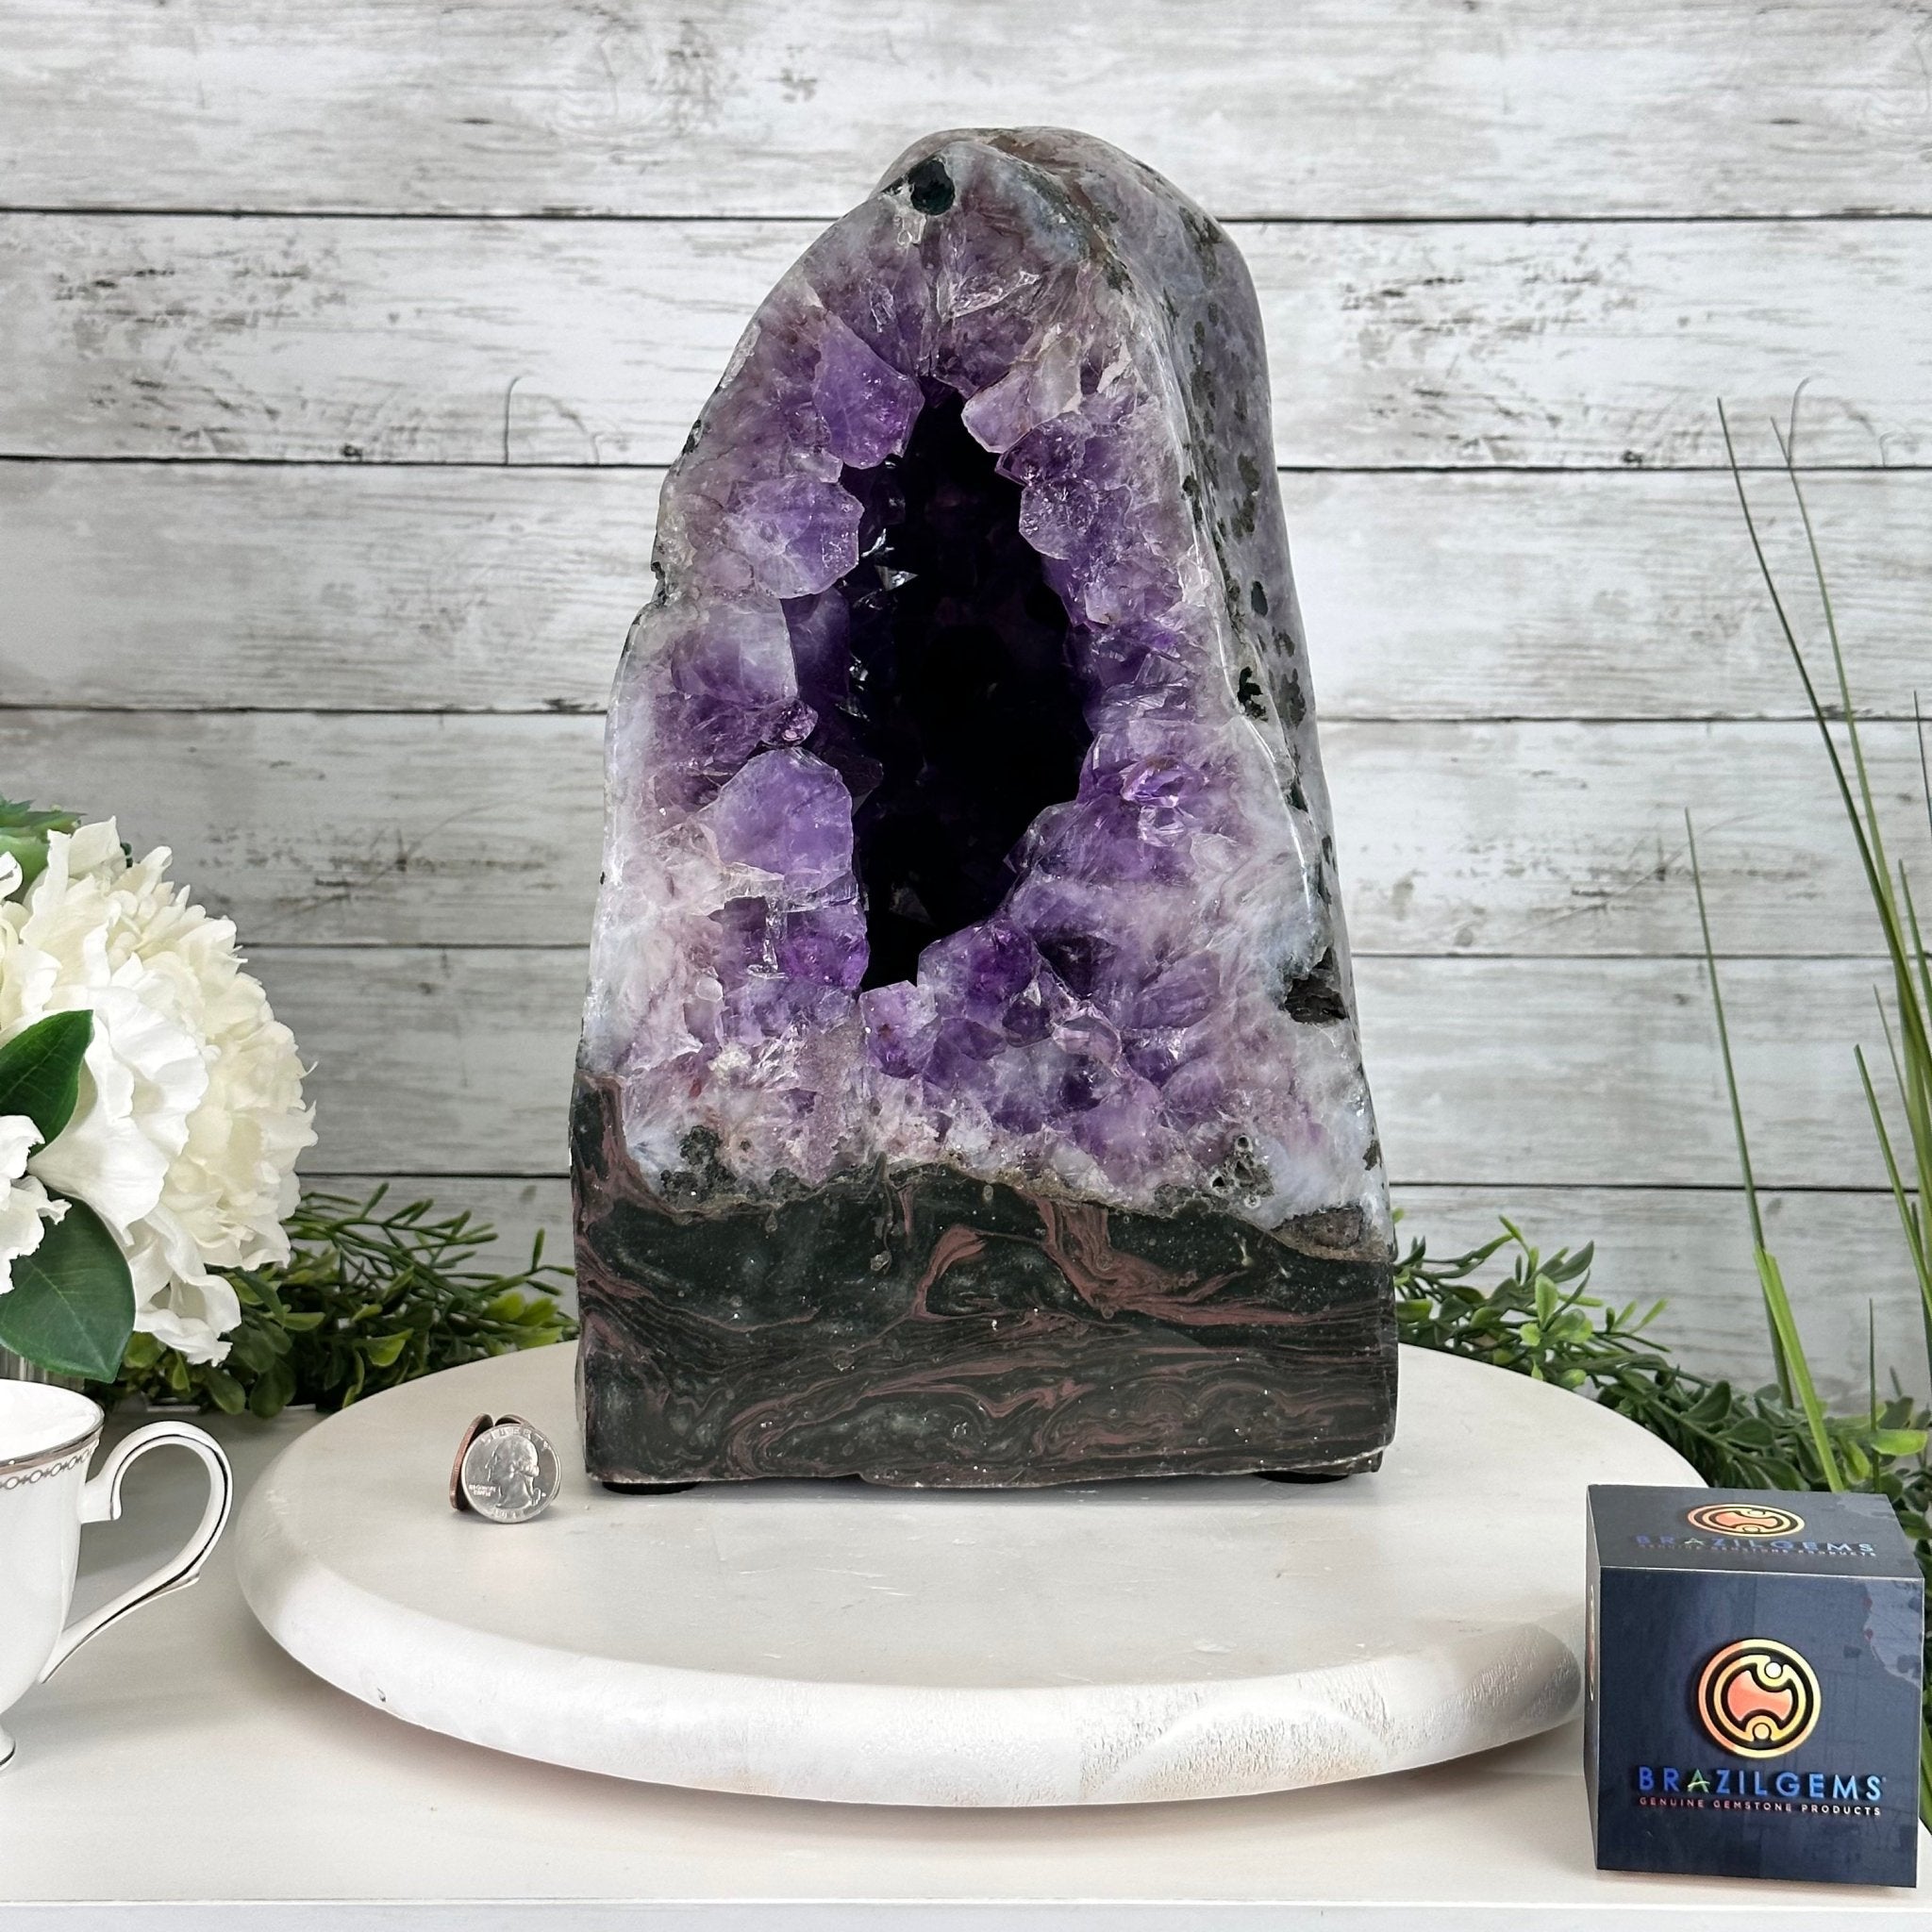 Extra Quality Polished Brazilian Amethyst Cathedral, 37 lbs & 13.5" tall Model #5602-0189 by Brazil Gems - Brazil GemsBrazil GemsExtra Quality Polished Brazilian Amethyst Cathedral, 37 lbs & 13.5" tall Model #5602-0189 by Brazil GemsPolished Cathedrals5602-0189